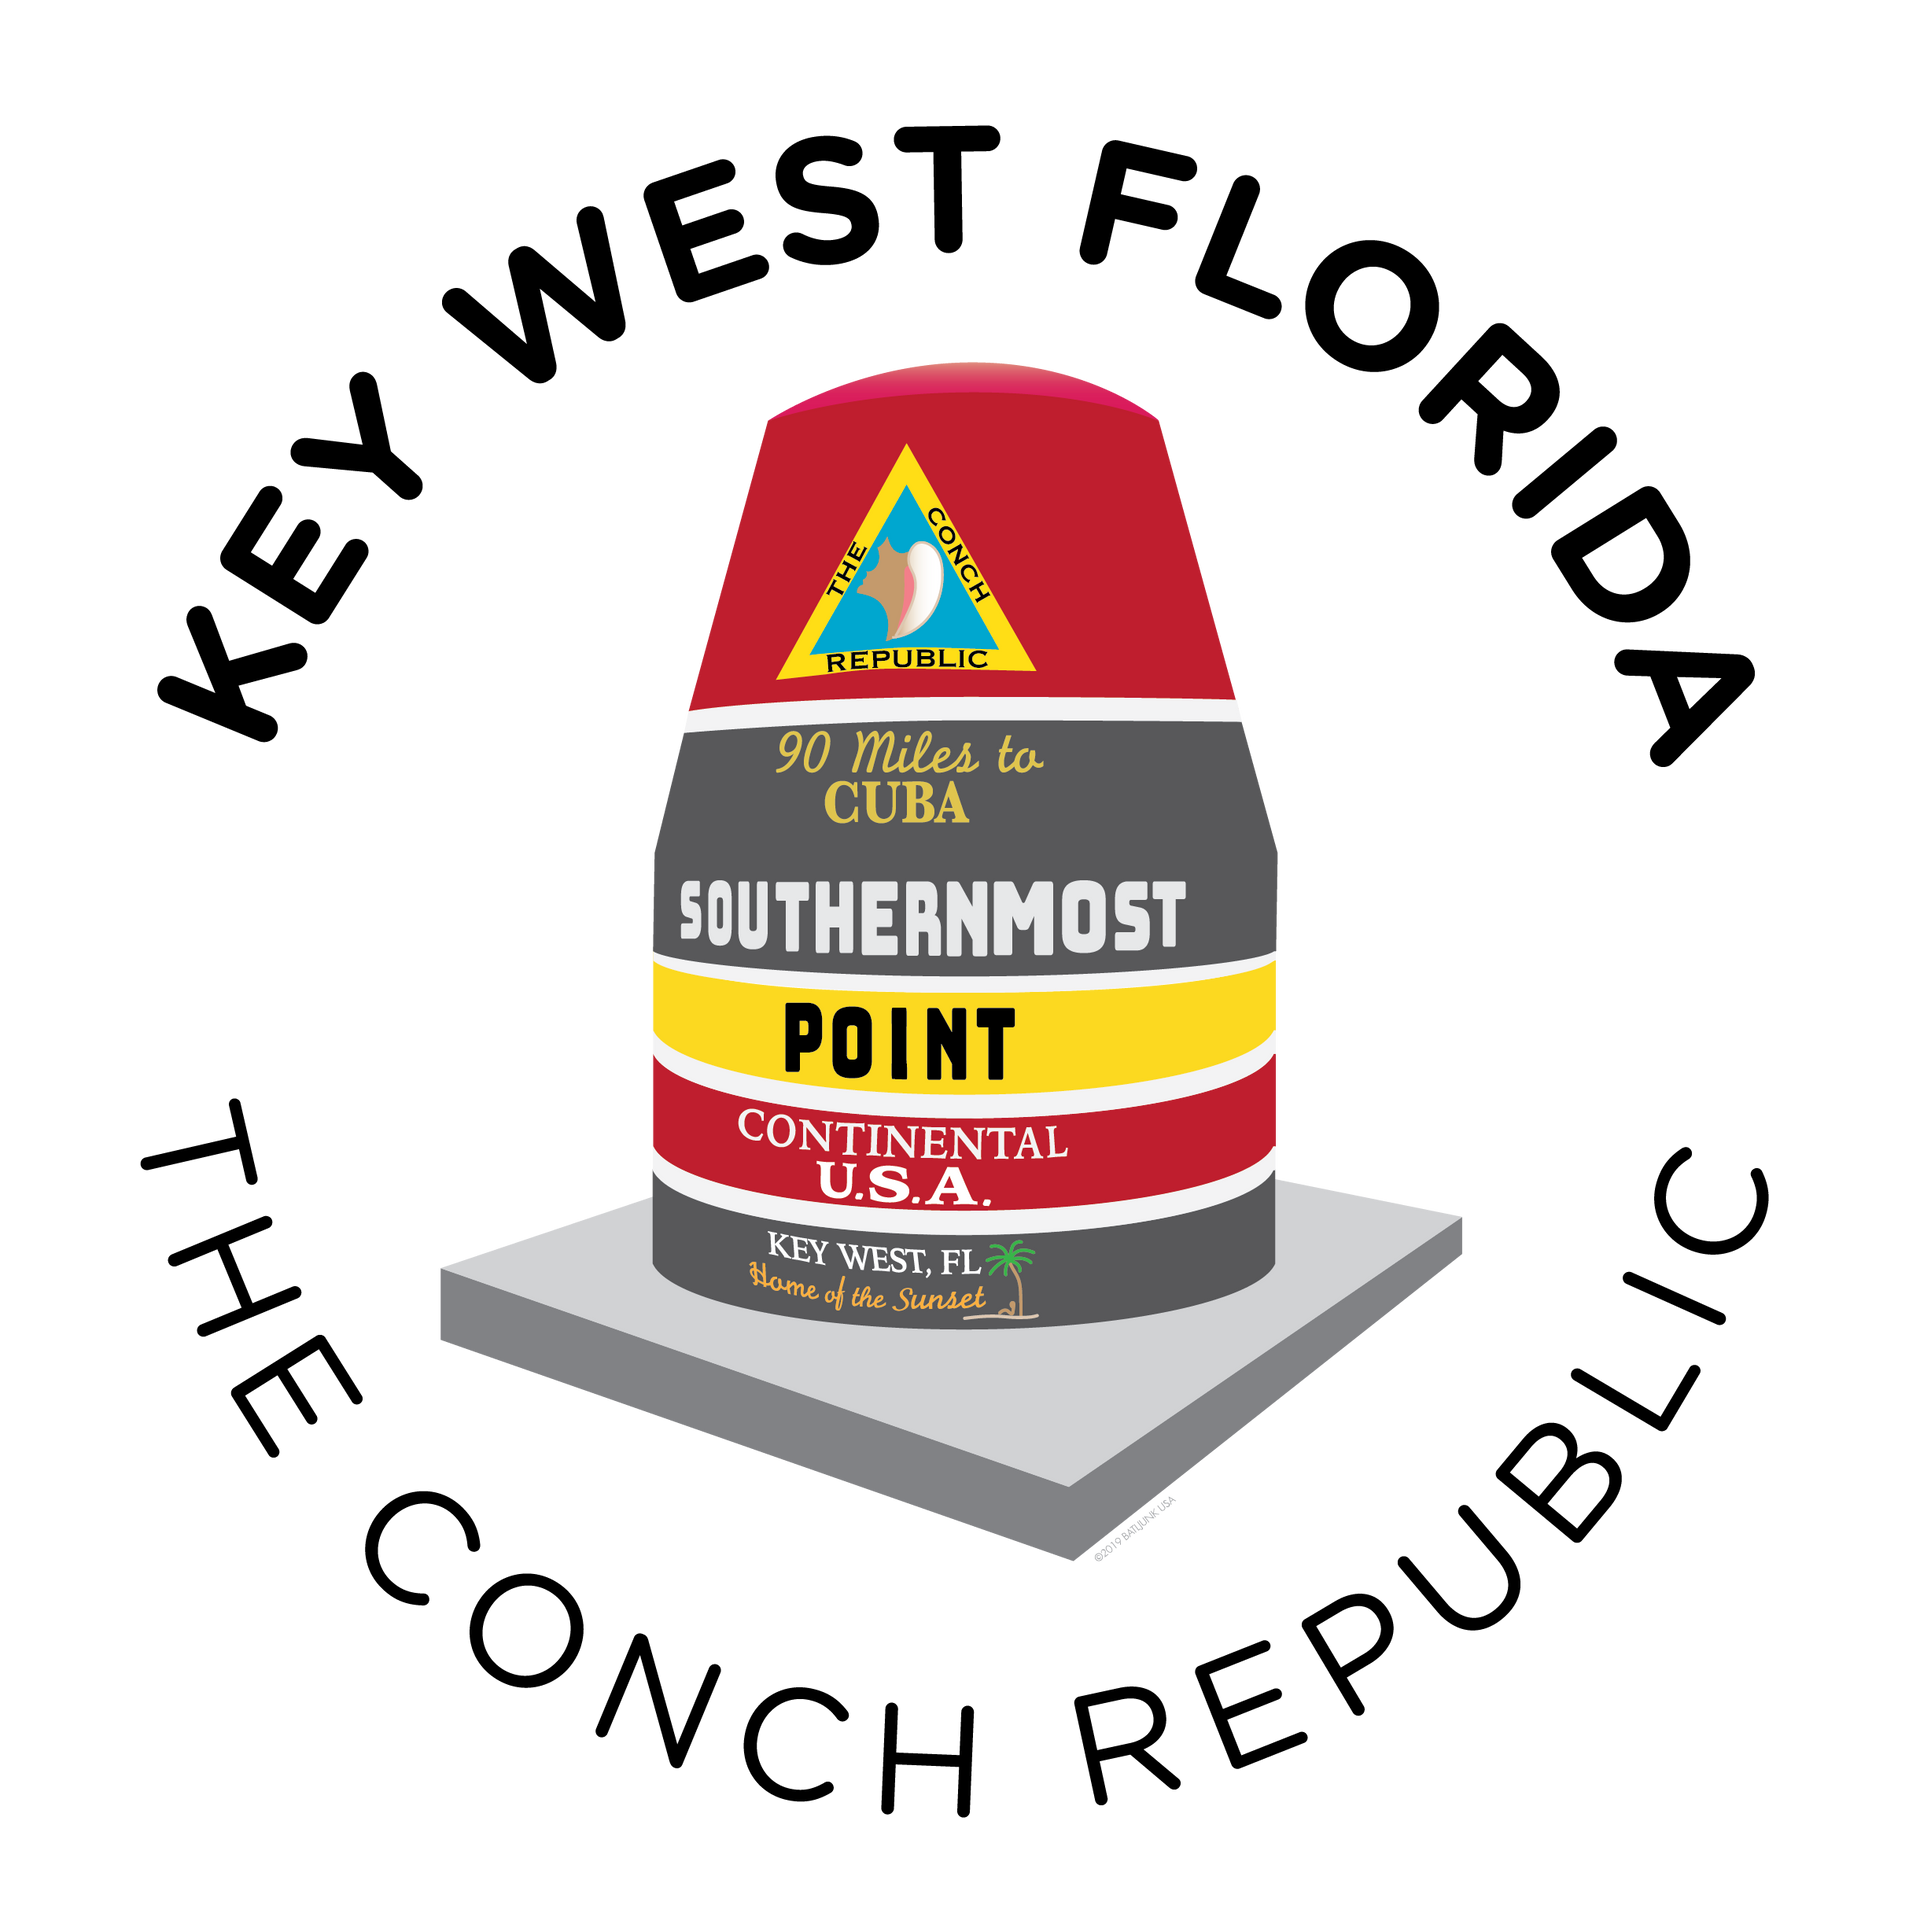 Discover the Southernmost Point